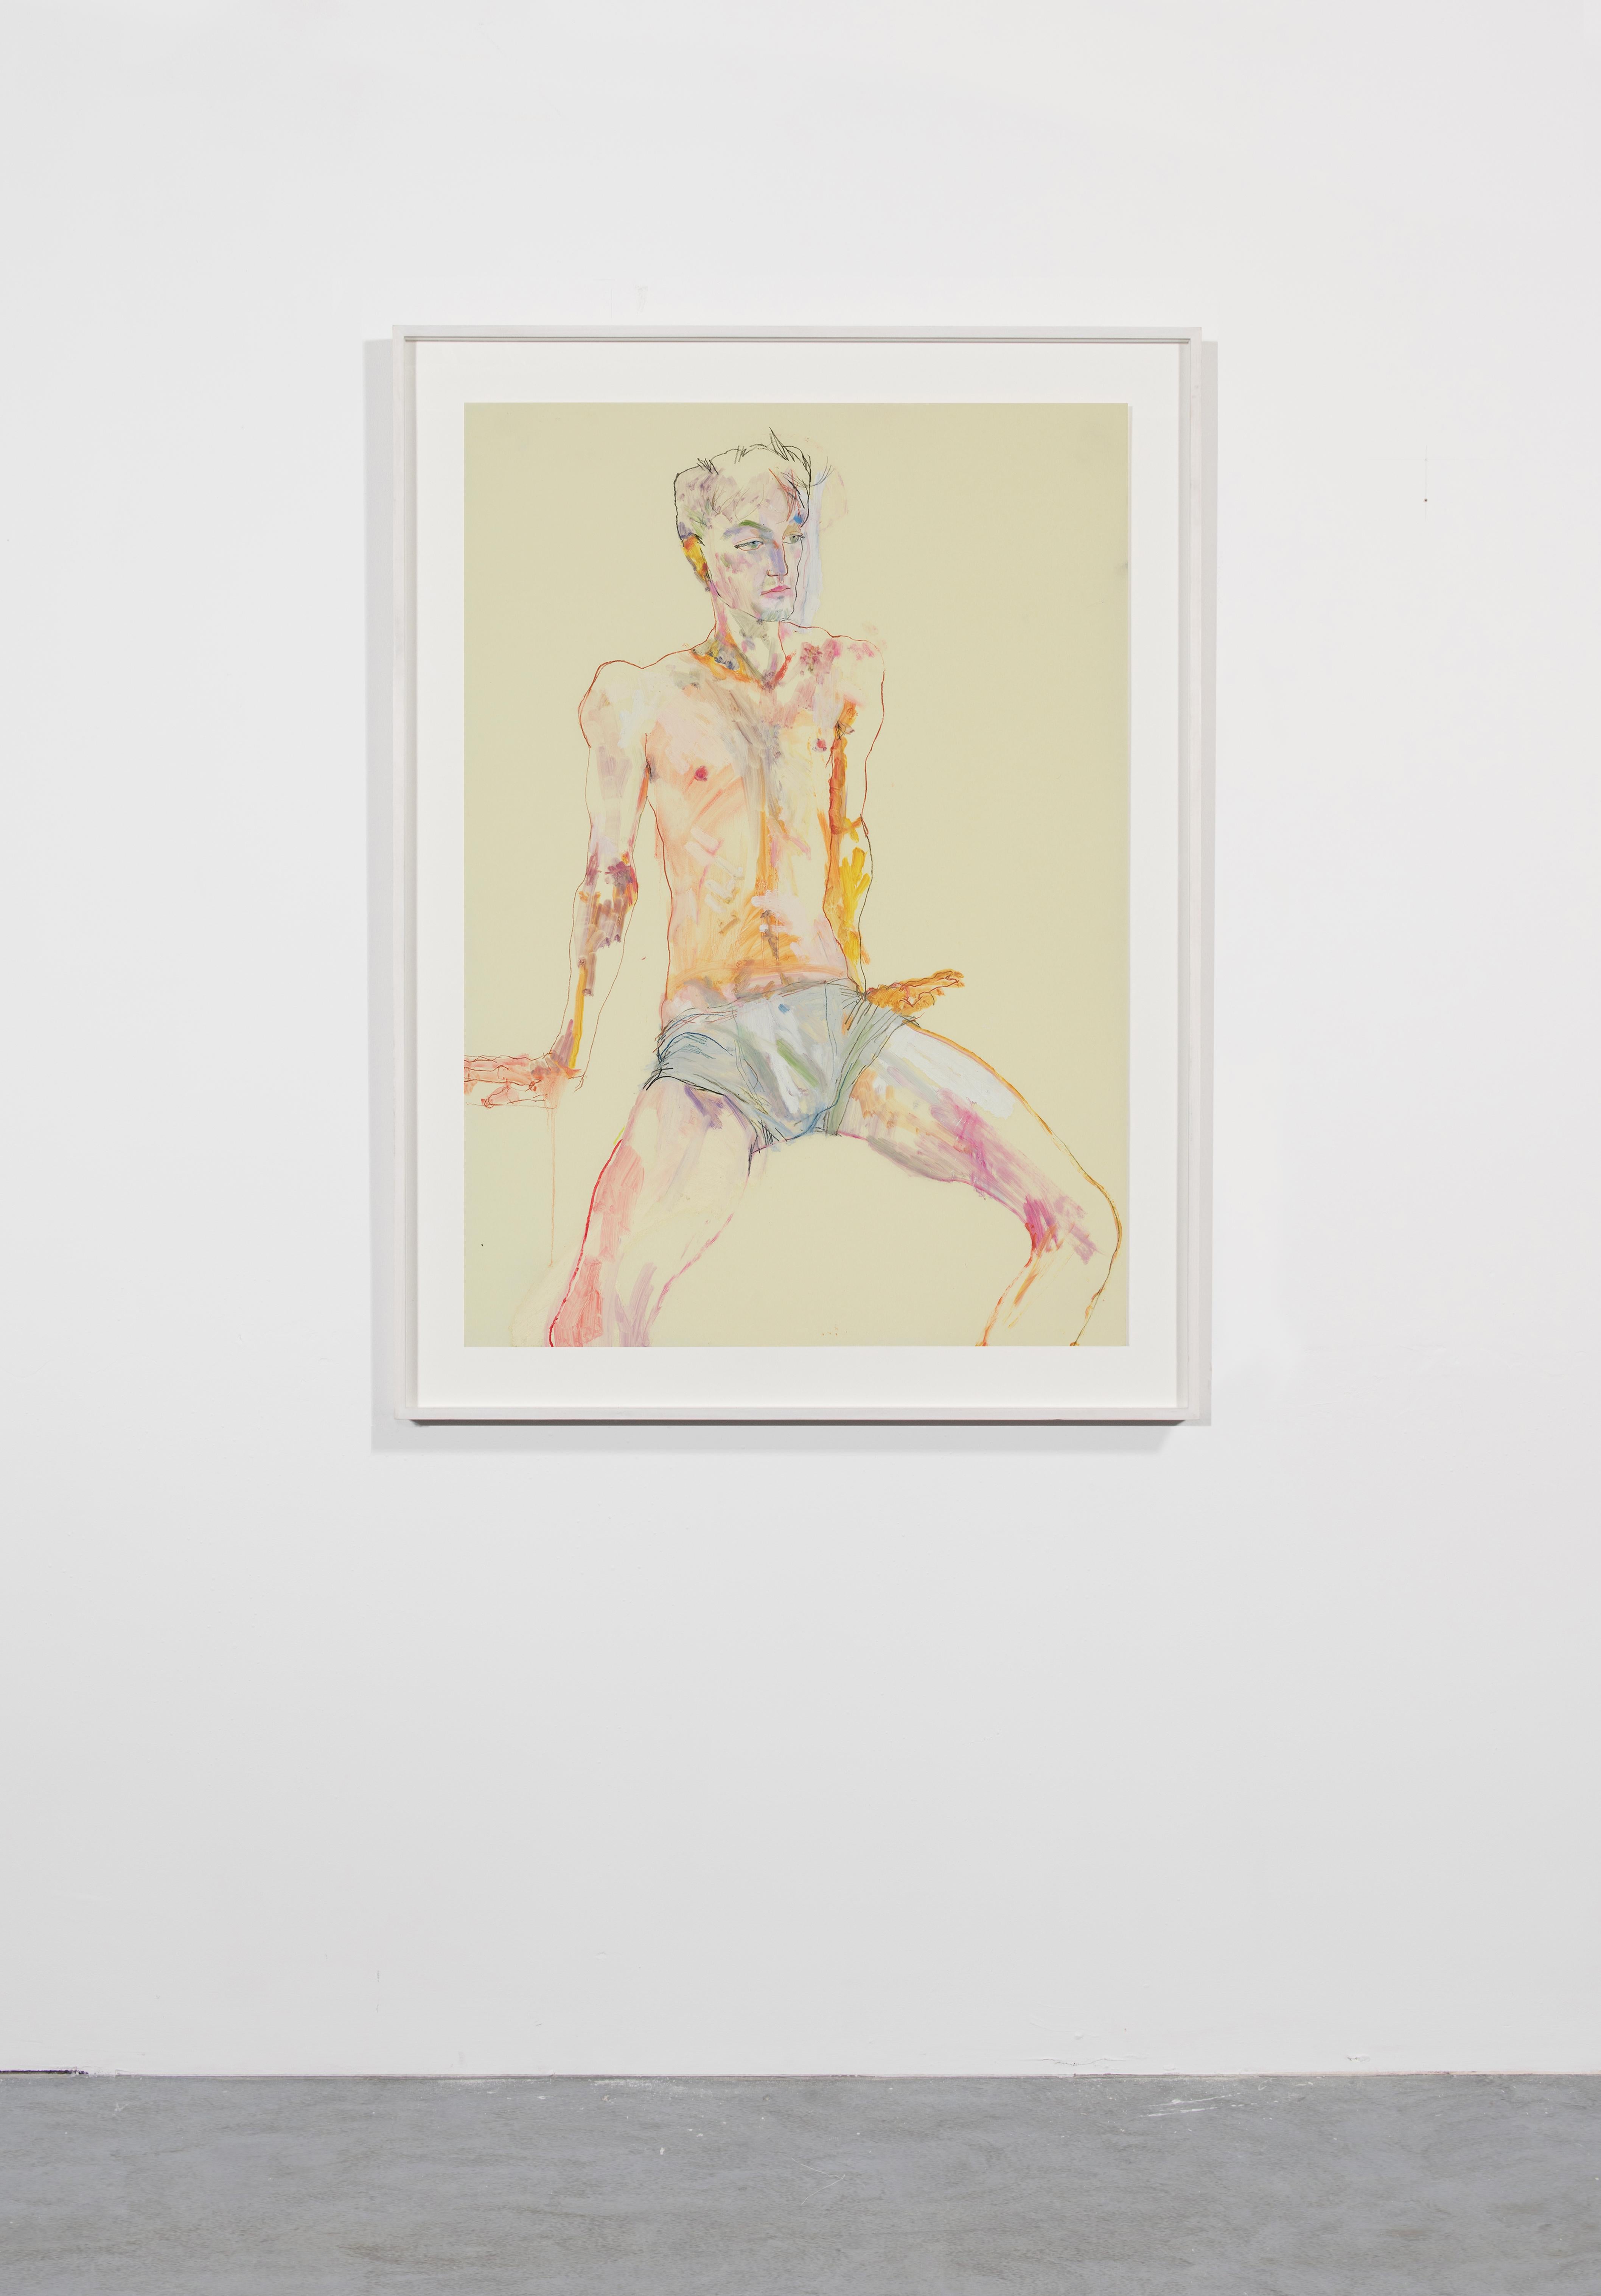 Andrew (Sitting, 3/4 Figure - Blue Shorts), Mixed media on Pergamenata parchment - Contemporary Painting by Howard Tangye